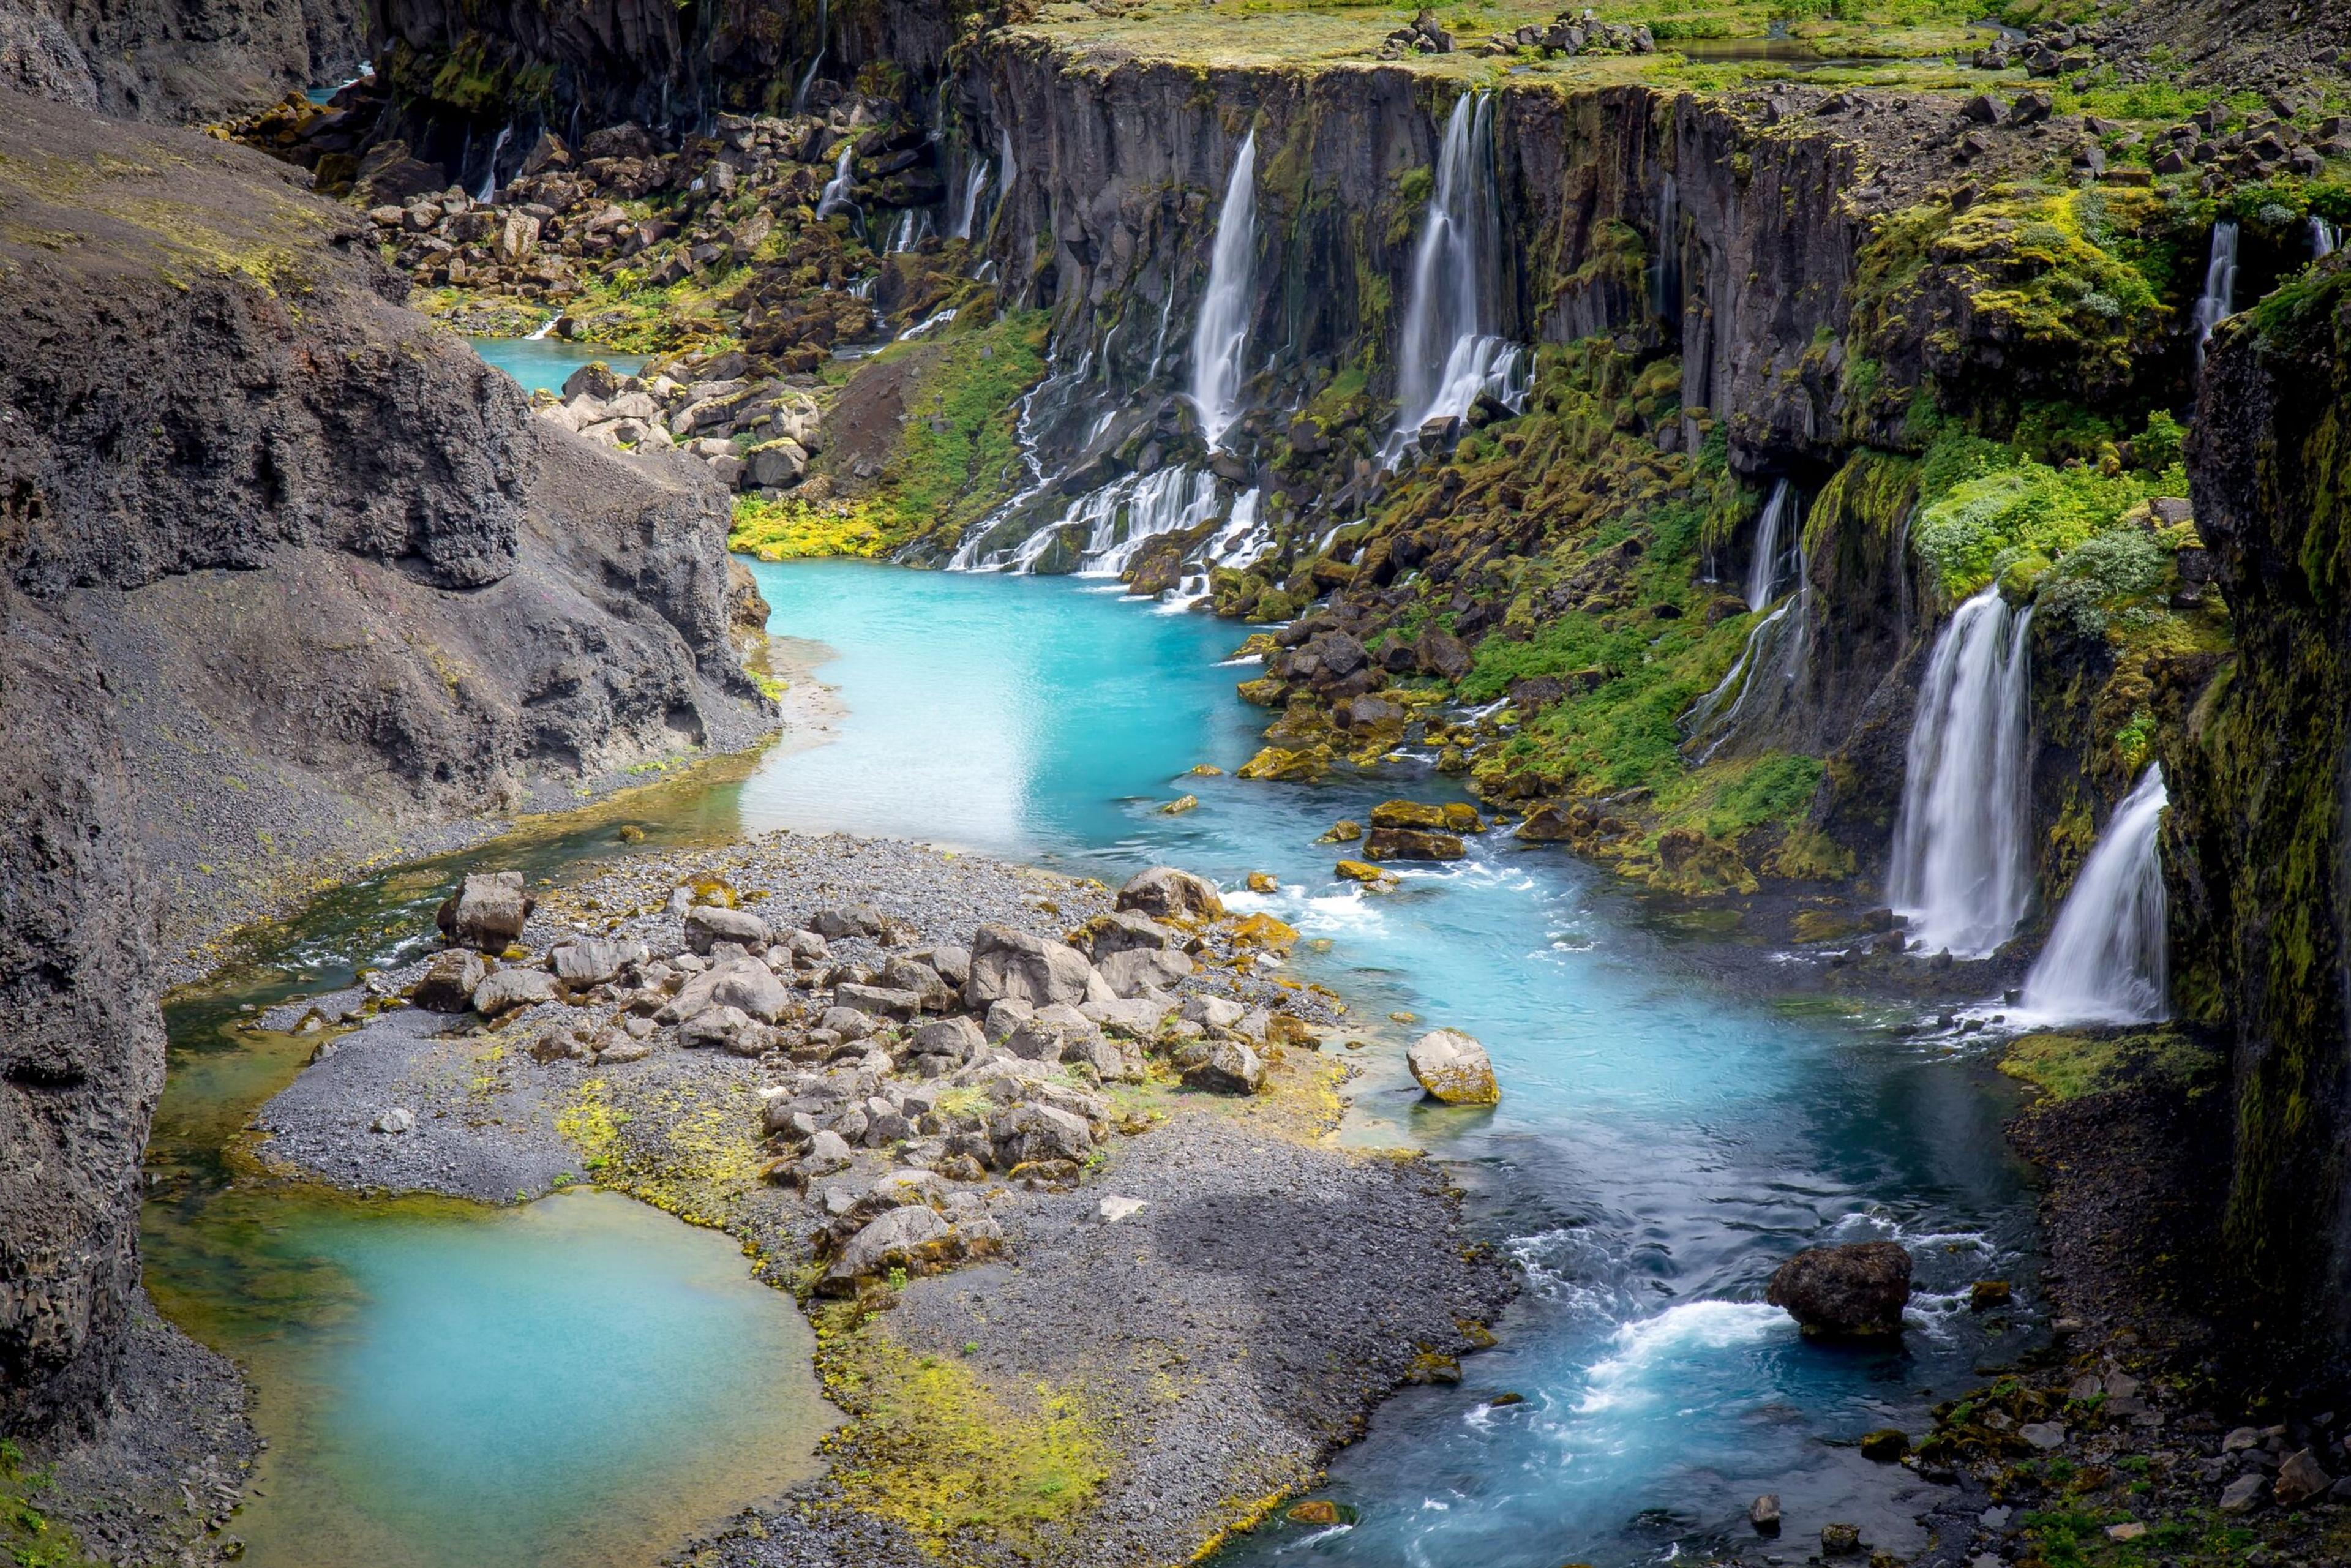 Alt text: "Aerial view of Sigöldugljúfur canyon in Iceland, showing a river meandering through a rugged landscape with multiple small waterfalls cascading into vibrant turquoise pools."